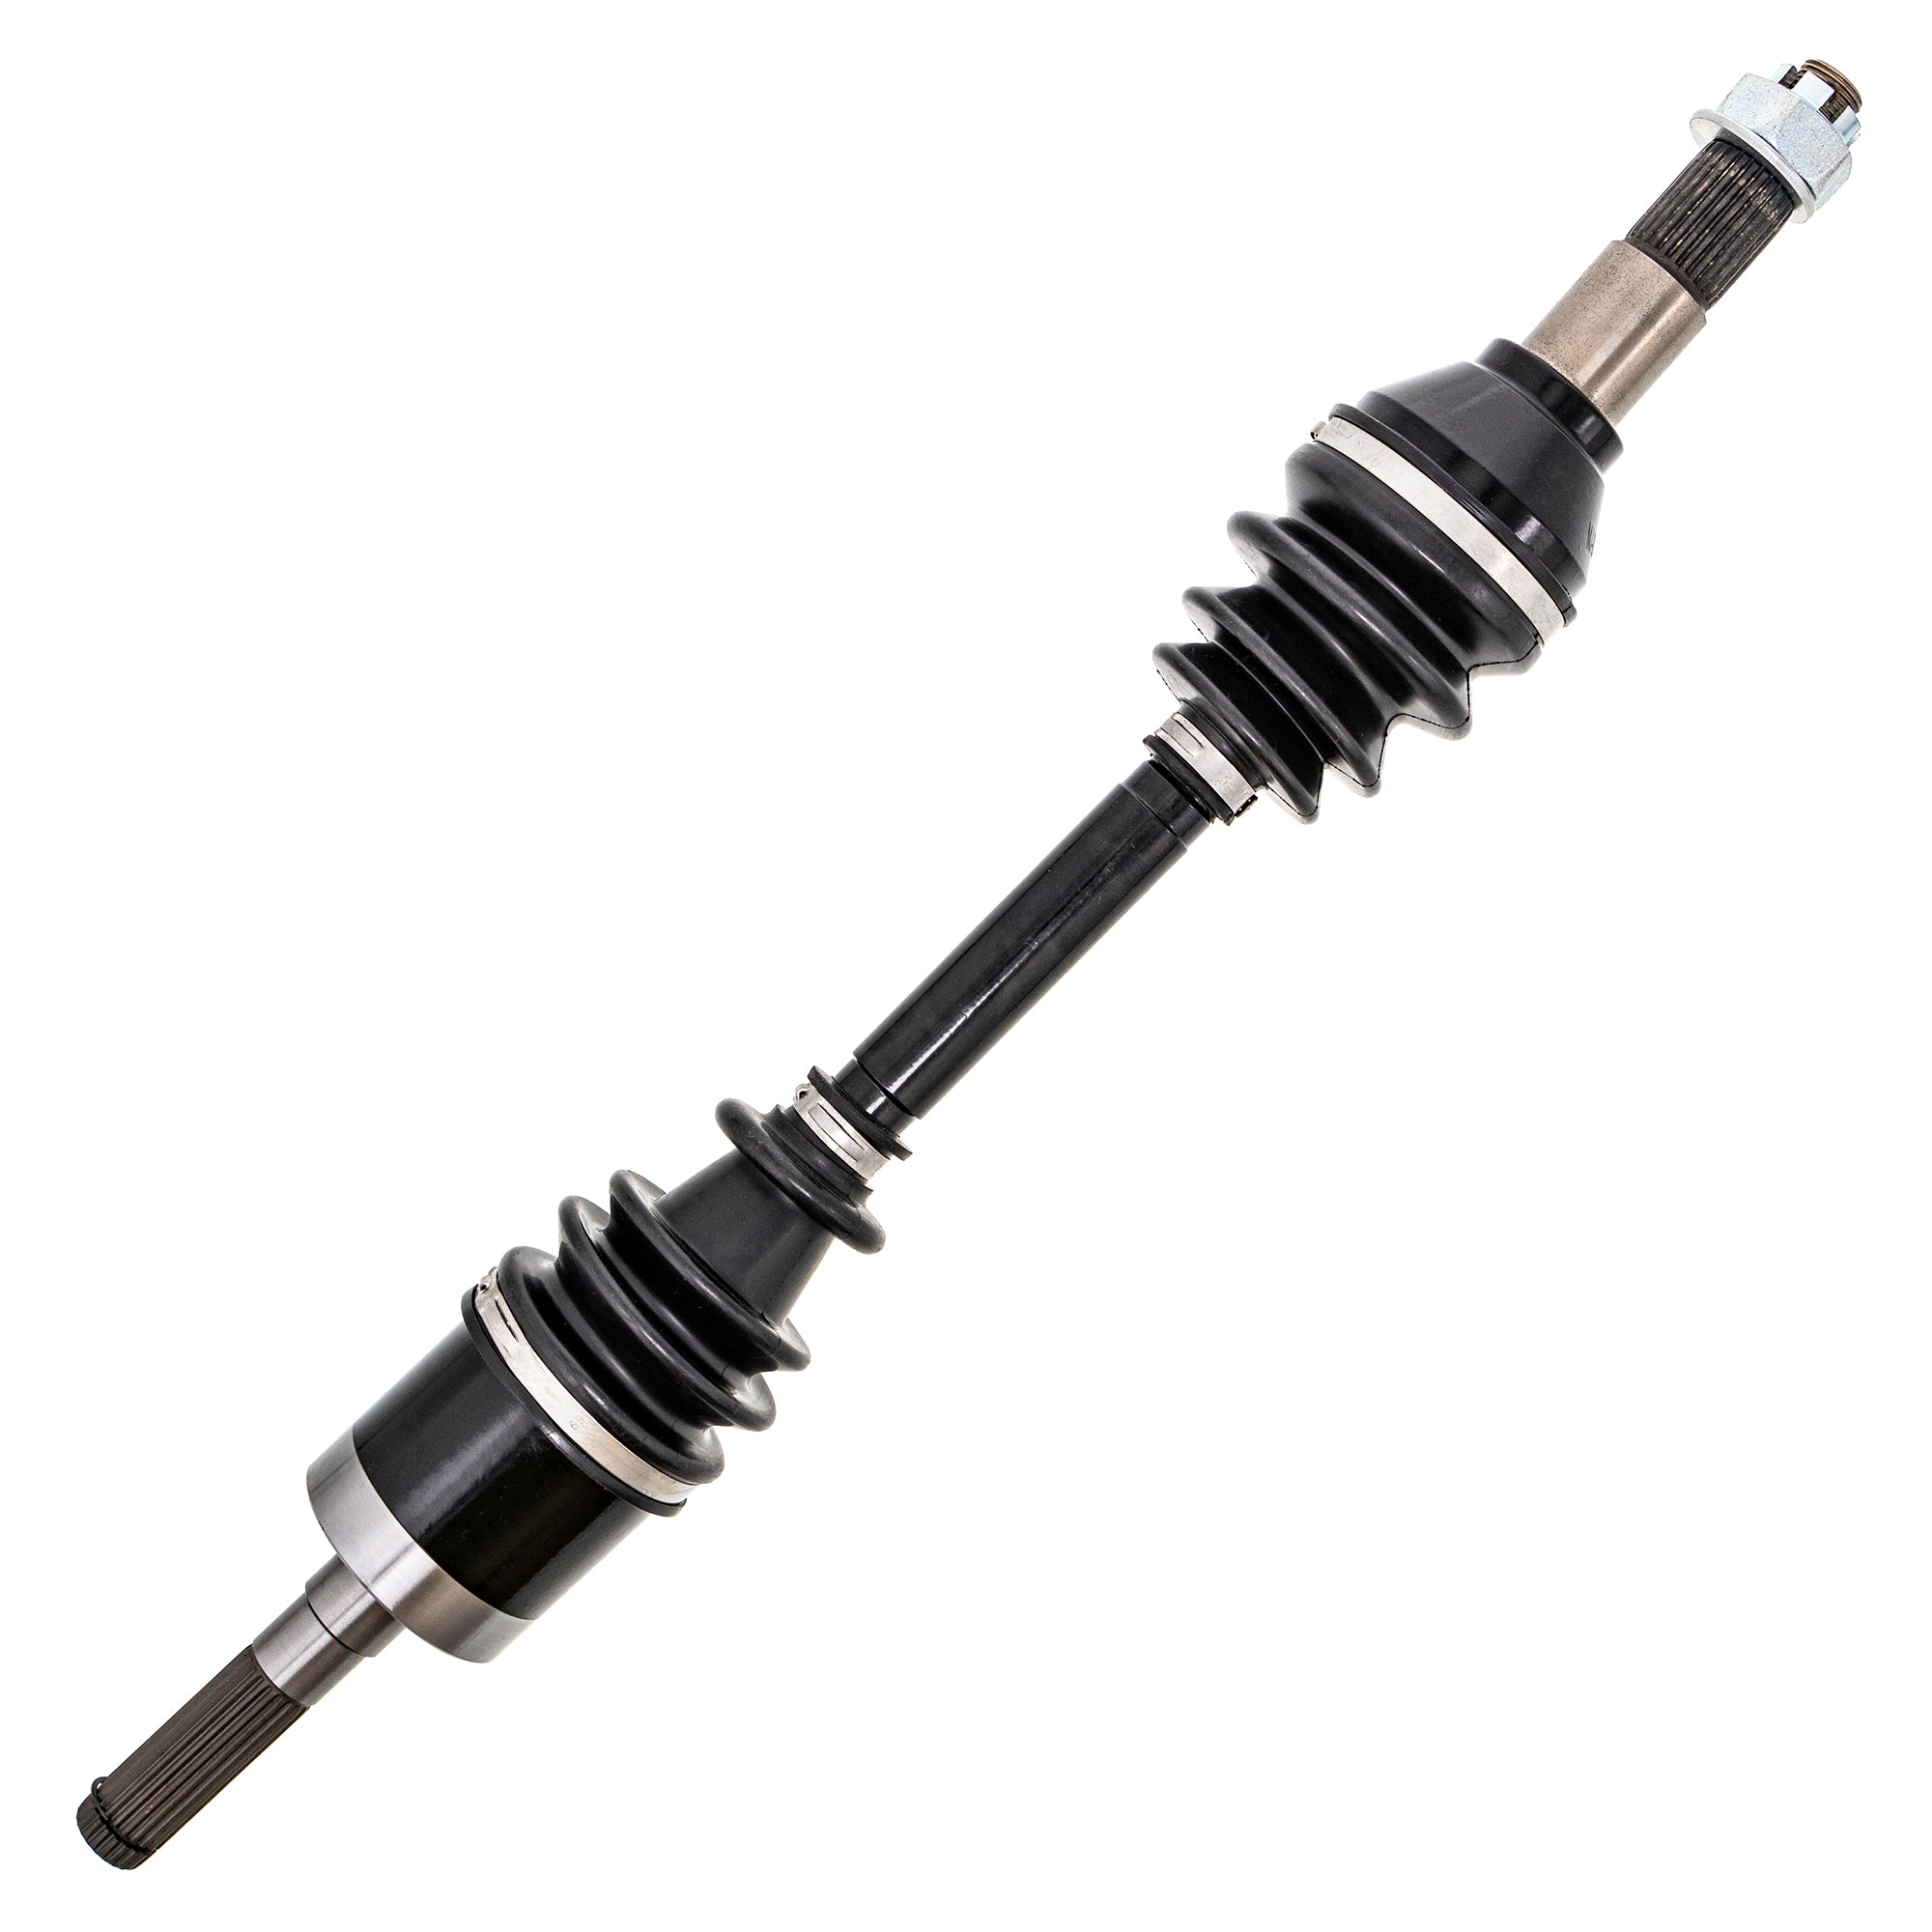 Complete F&R CV Axle Driveshaft Kit for Can-Am Outlander 450 570 Max